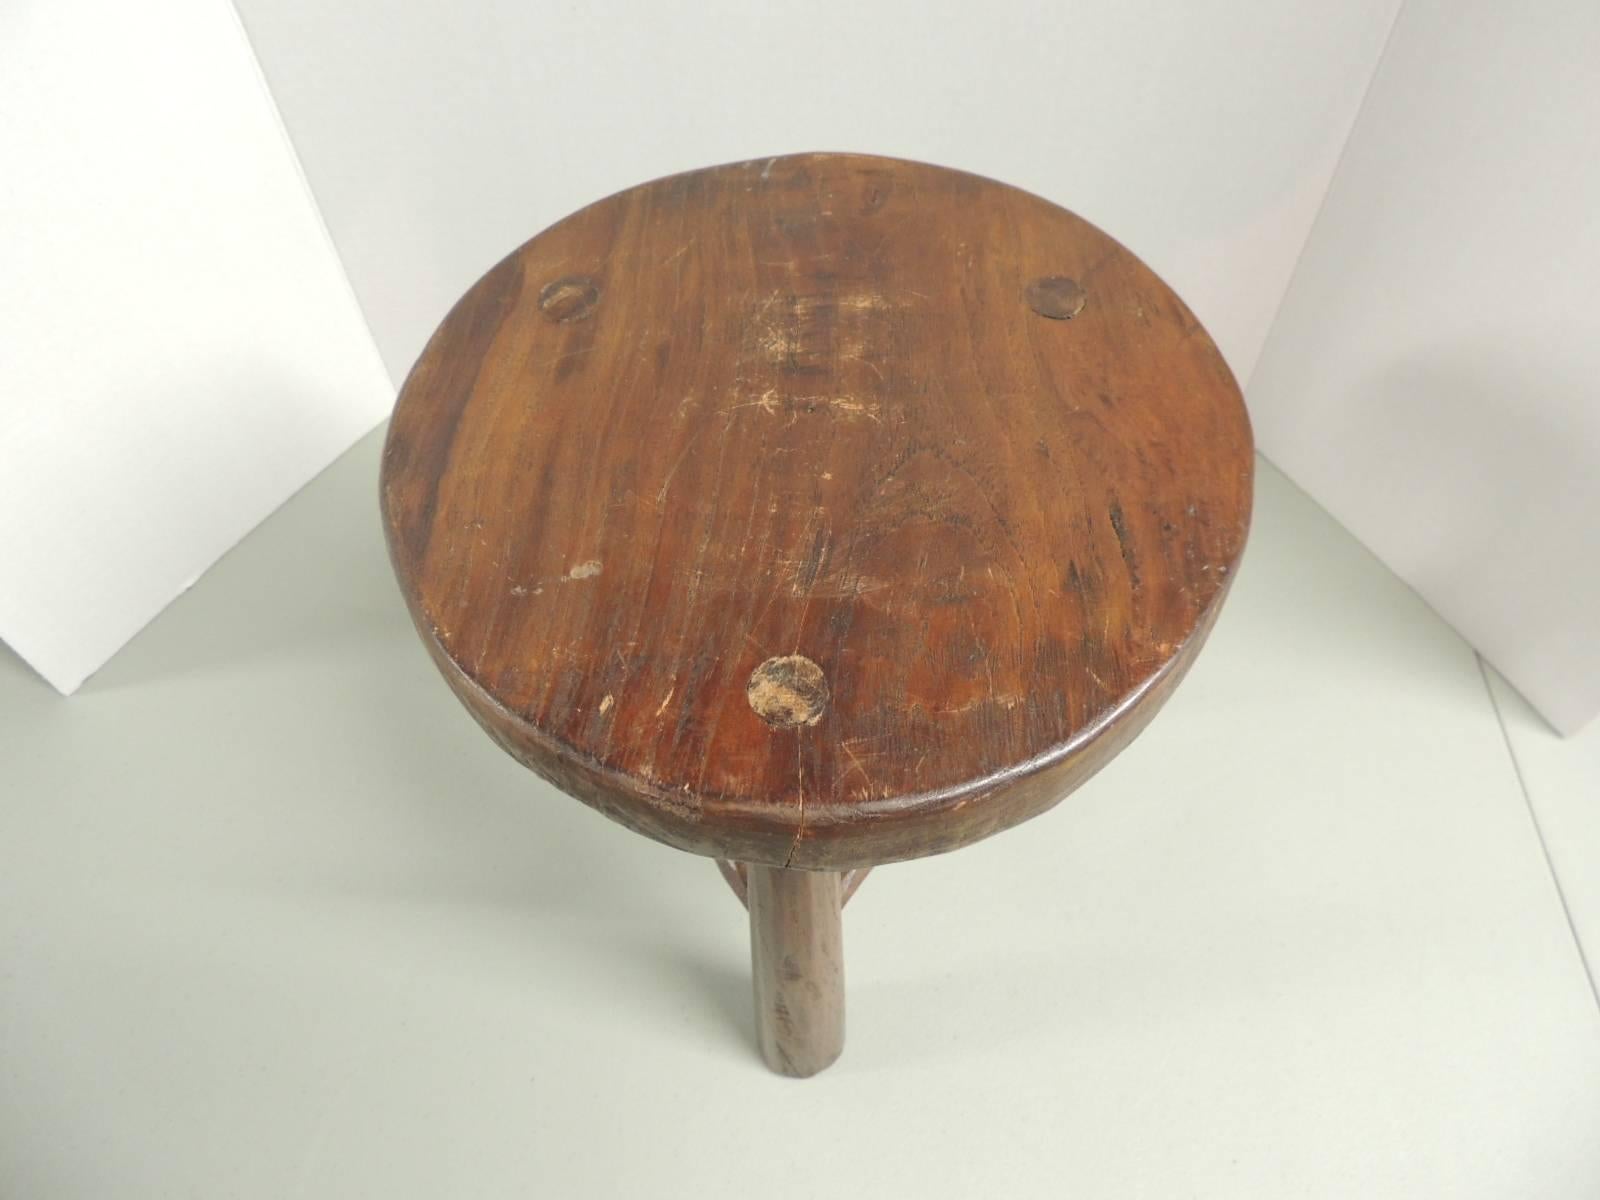 Round wood tripod three-legged low stool. Great side table for slipper chairs, drinks table or telephone table. Original manufacture brass plate under the top.